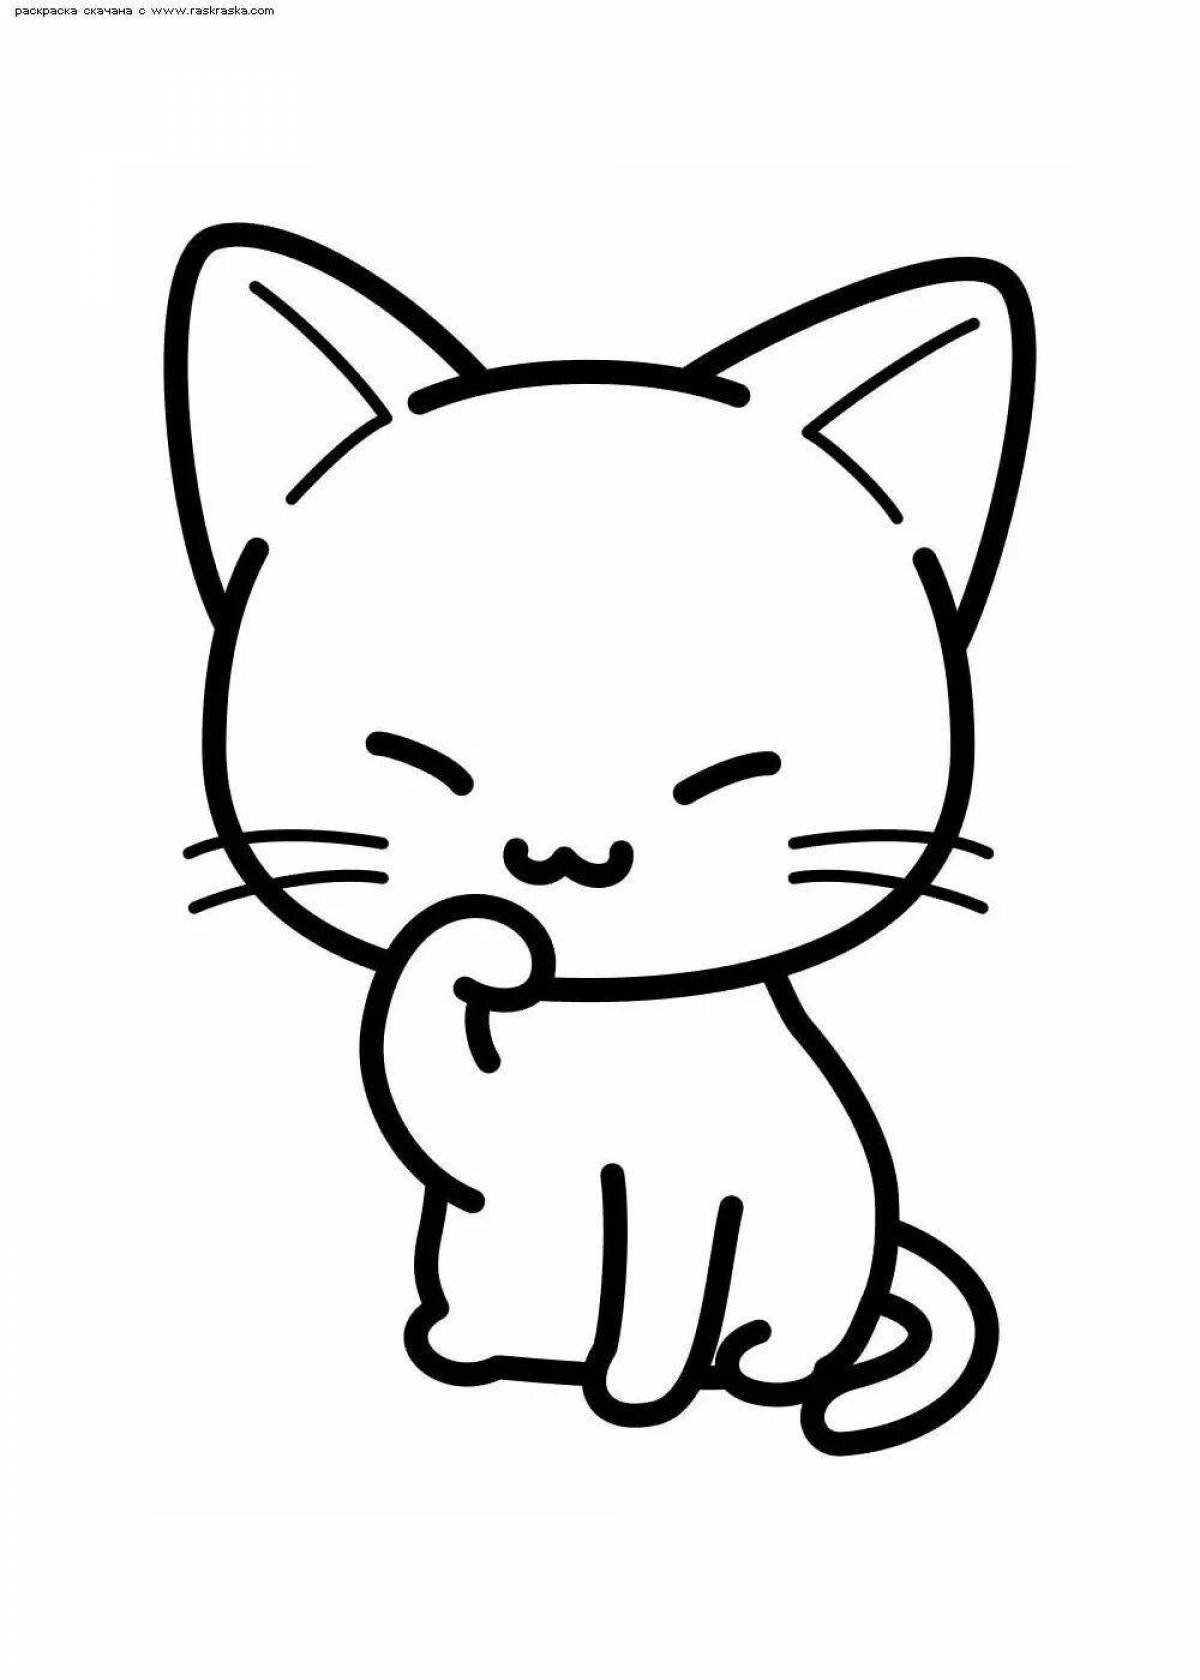 Coloring page waggling little kitty